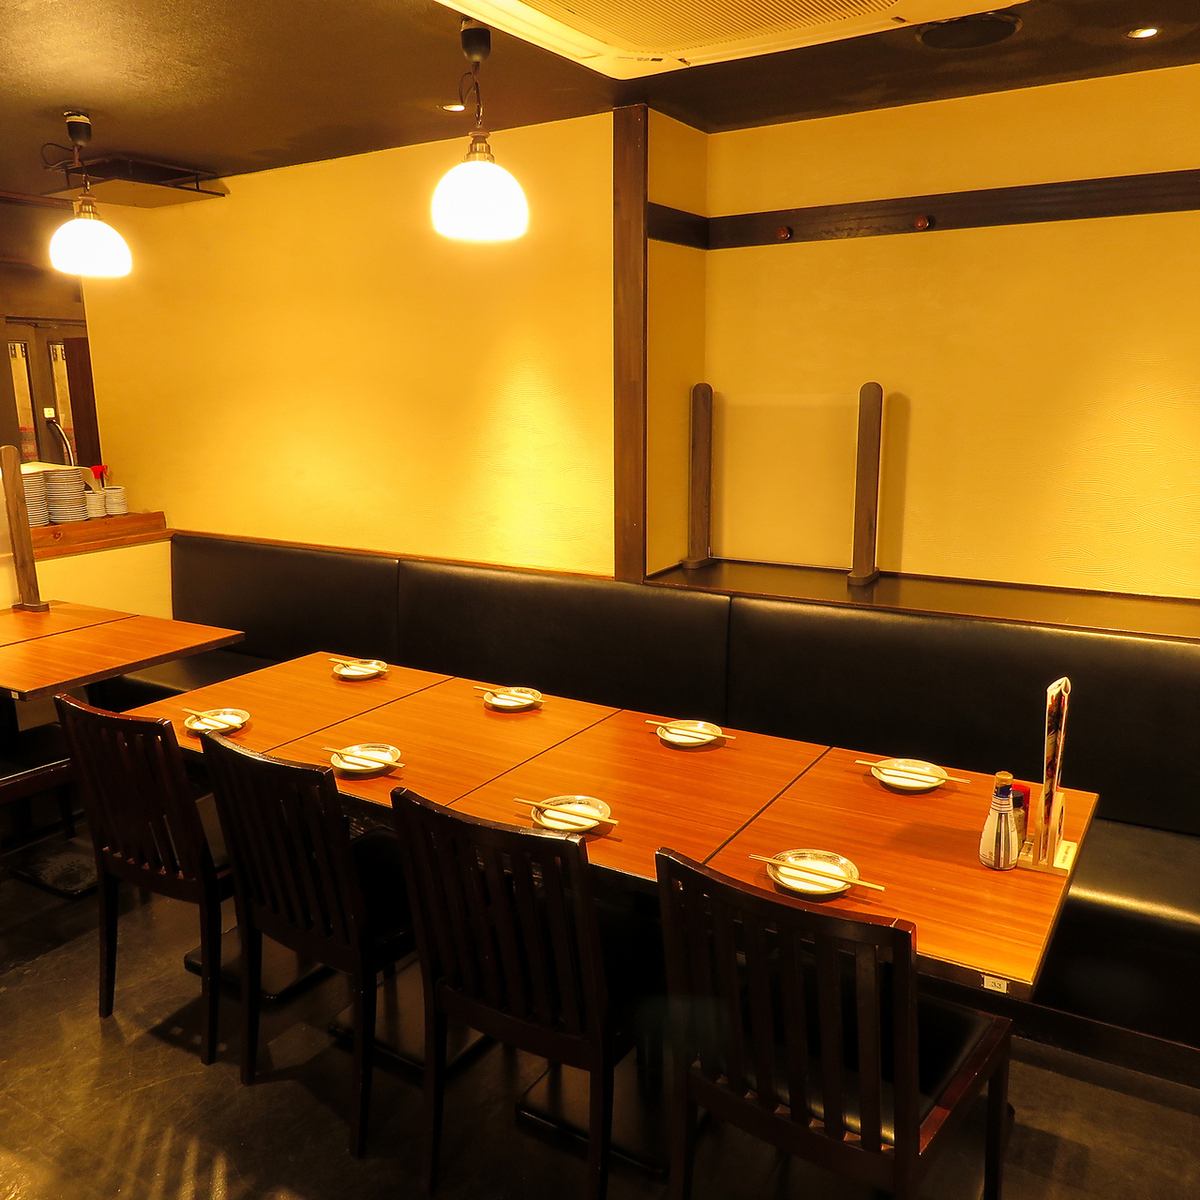 We also have private rooms that can accommodate 6 to 20 people! Perfect for dates and parties.